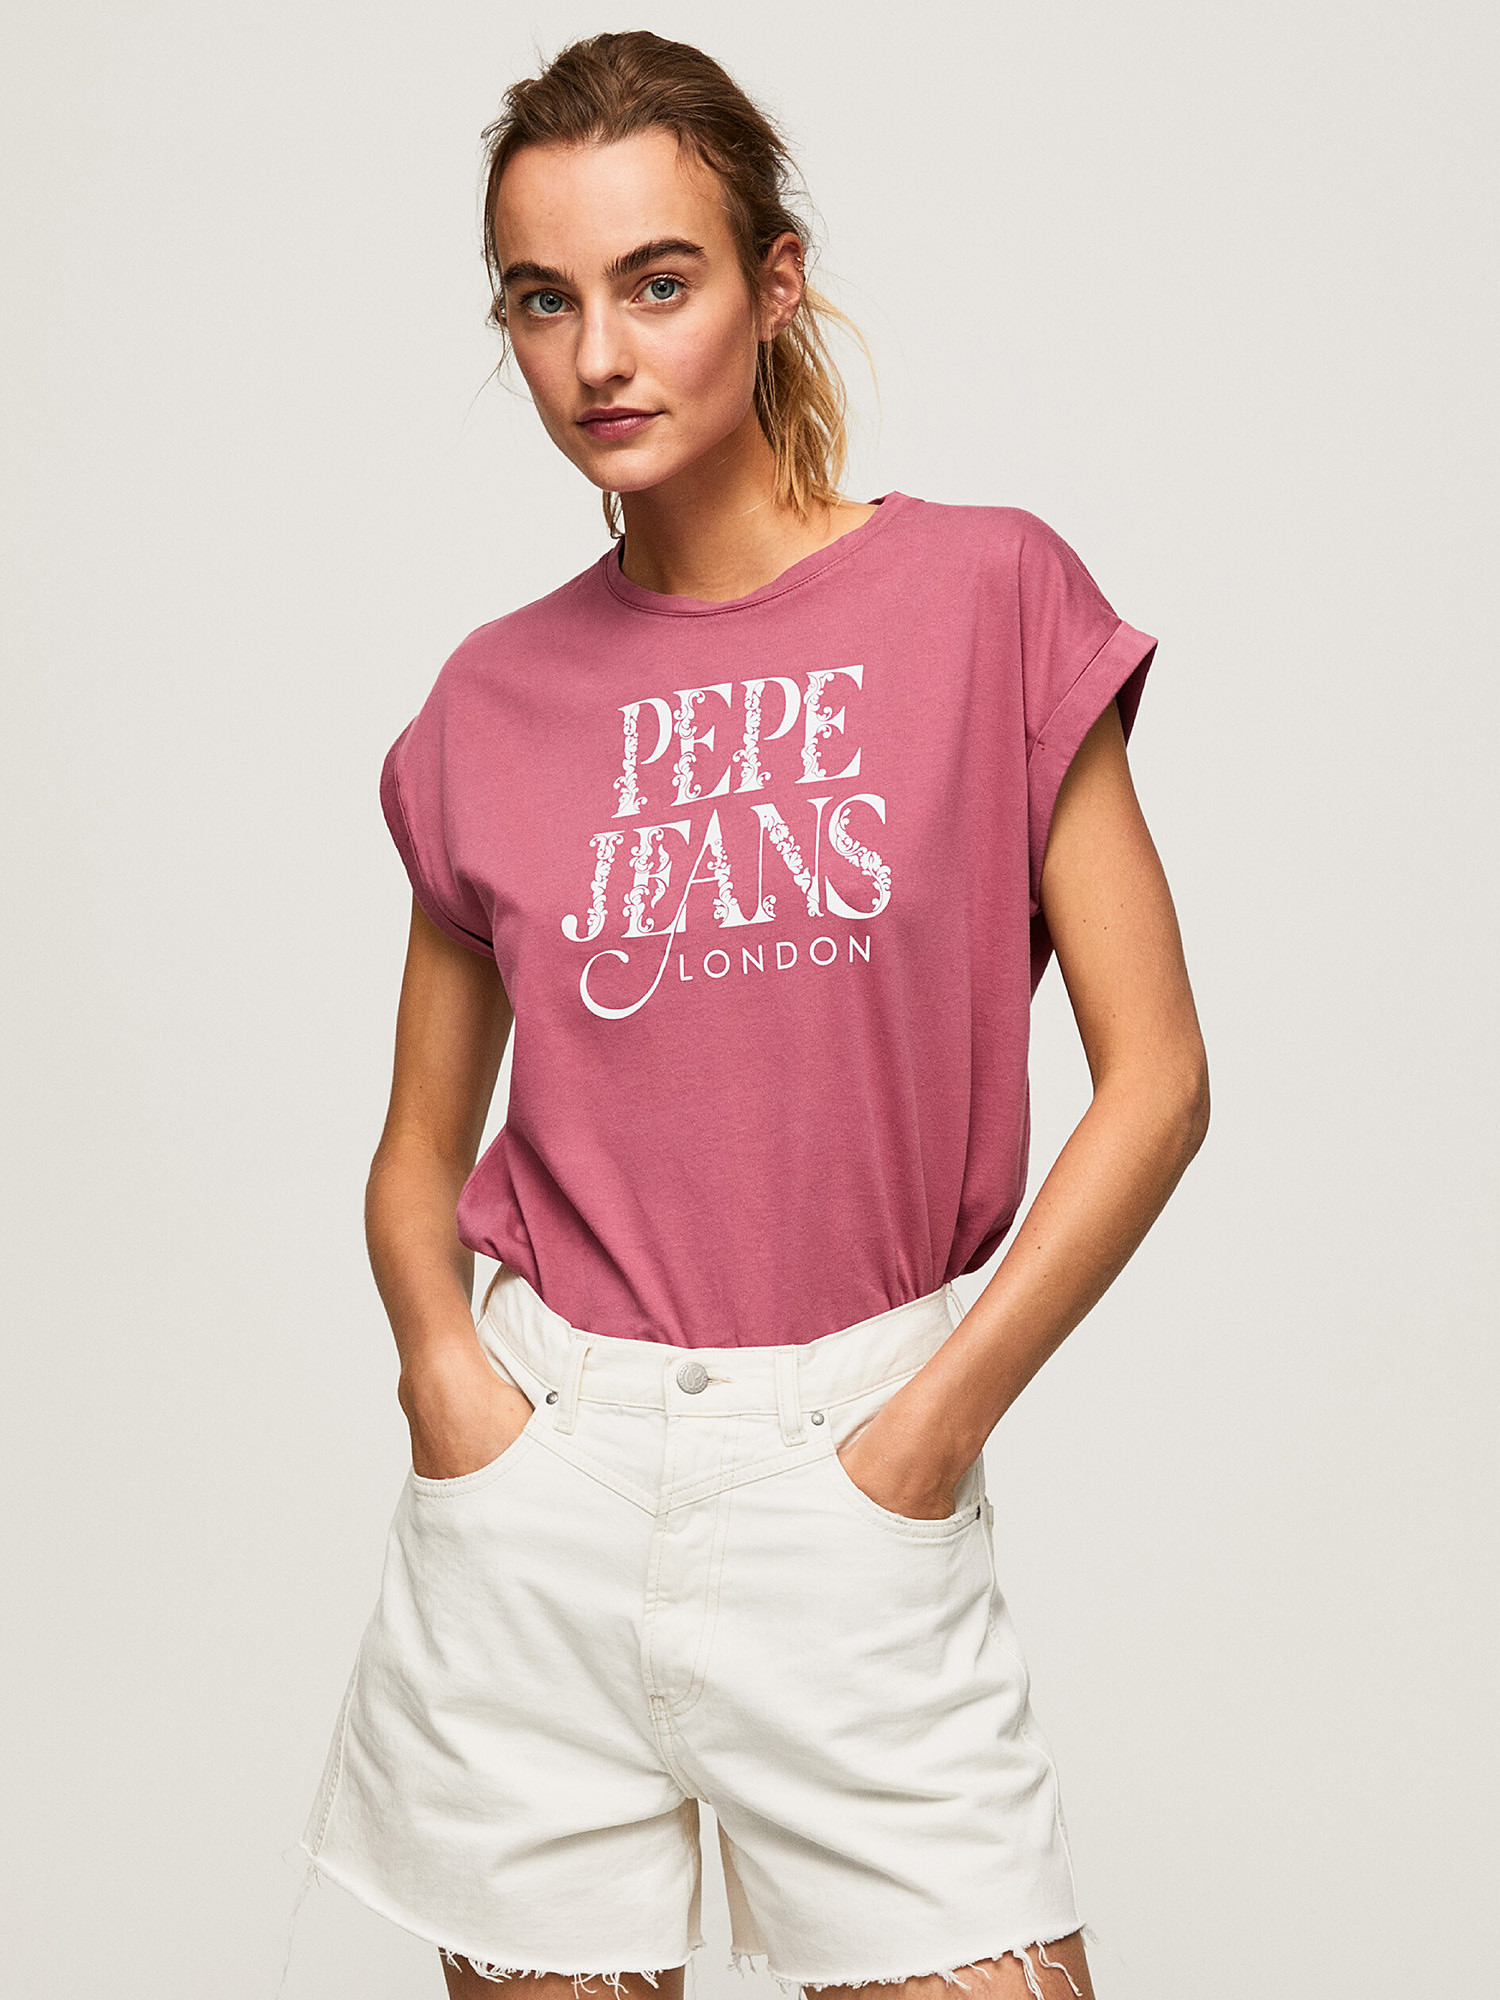 Pepe Jeans - T-shirt con logo in cotone, Rosa scuro, large image number 3